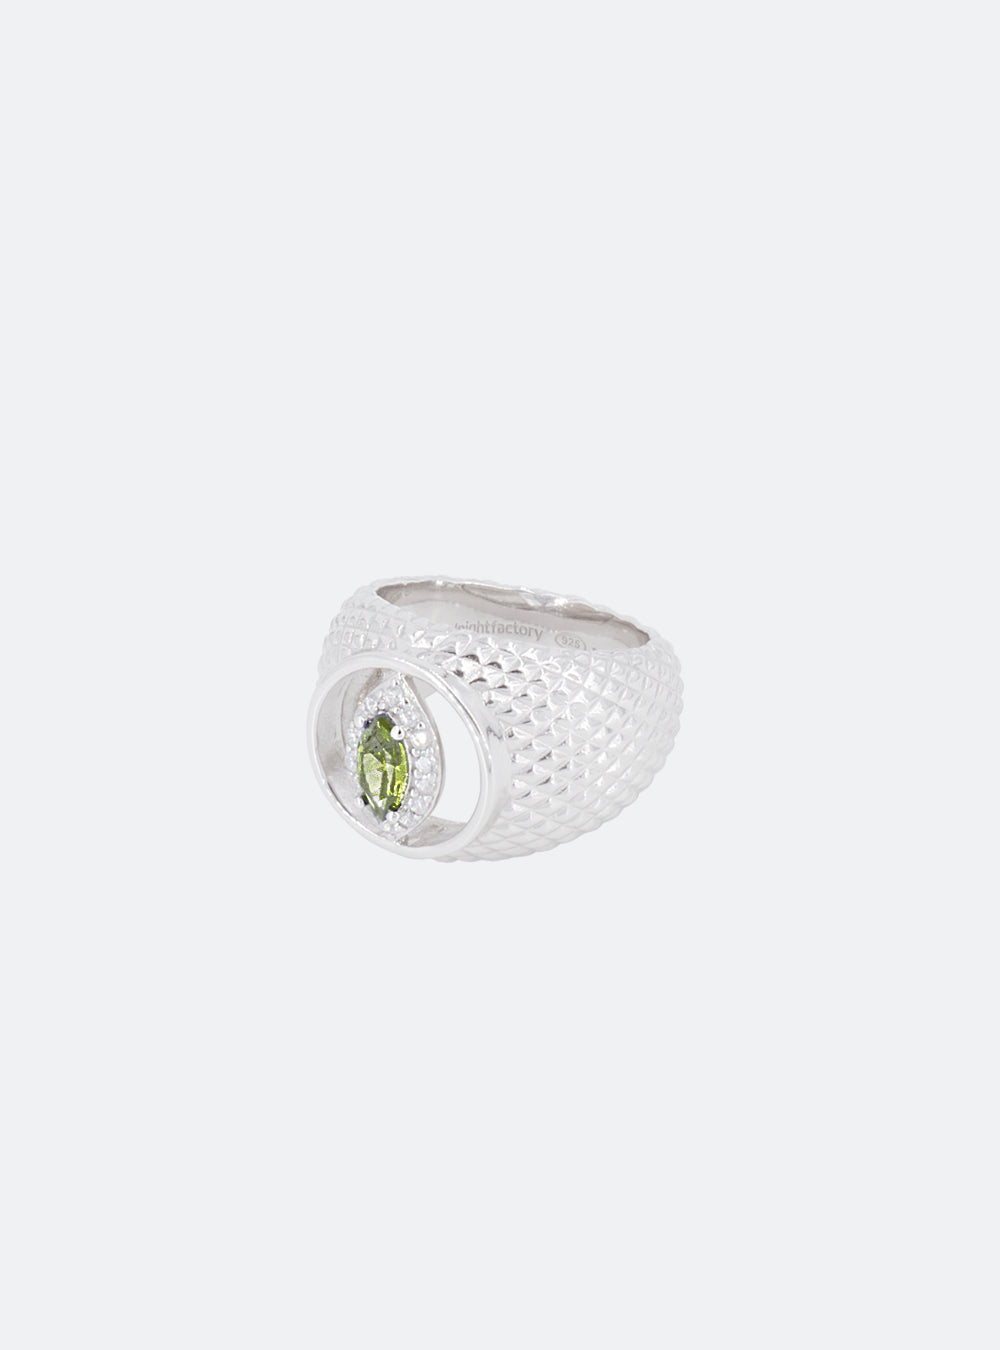 A MIDNIGHTFACTORY cat-eye cutout cocktail signet ring with a peridot stone.